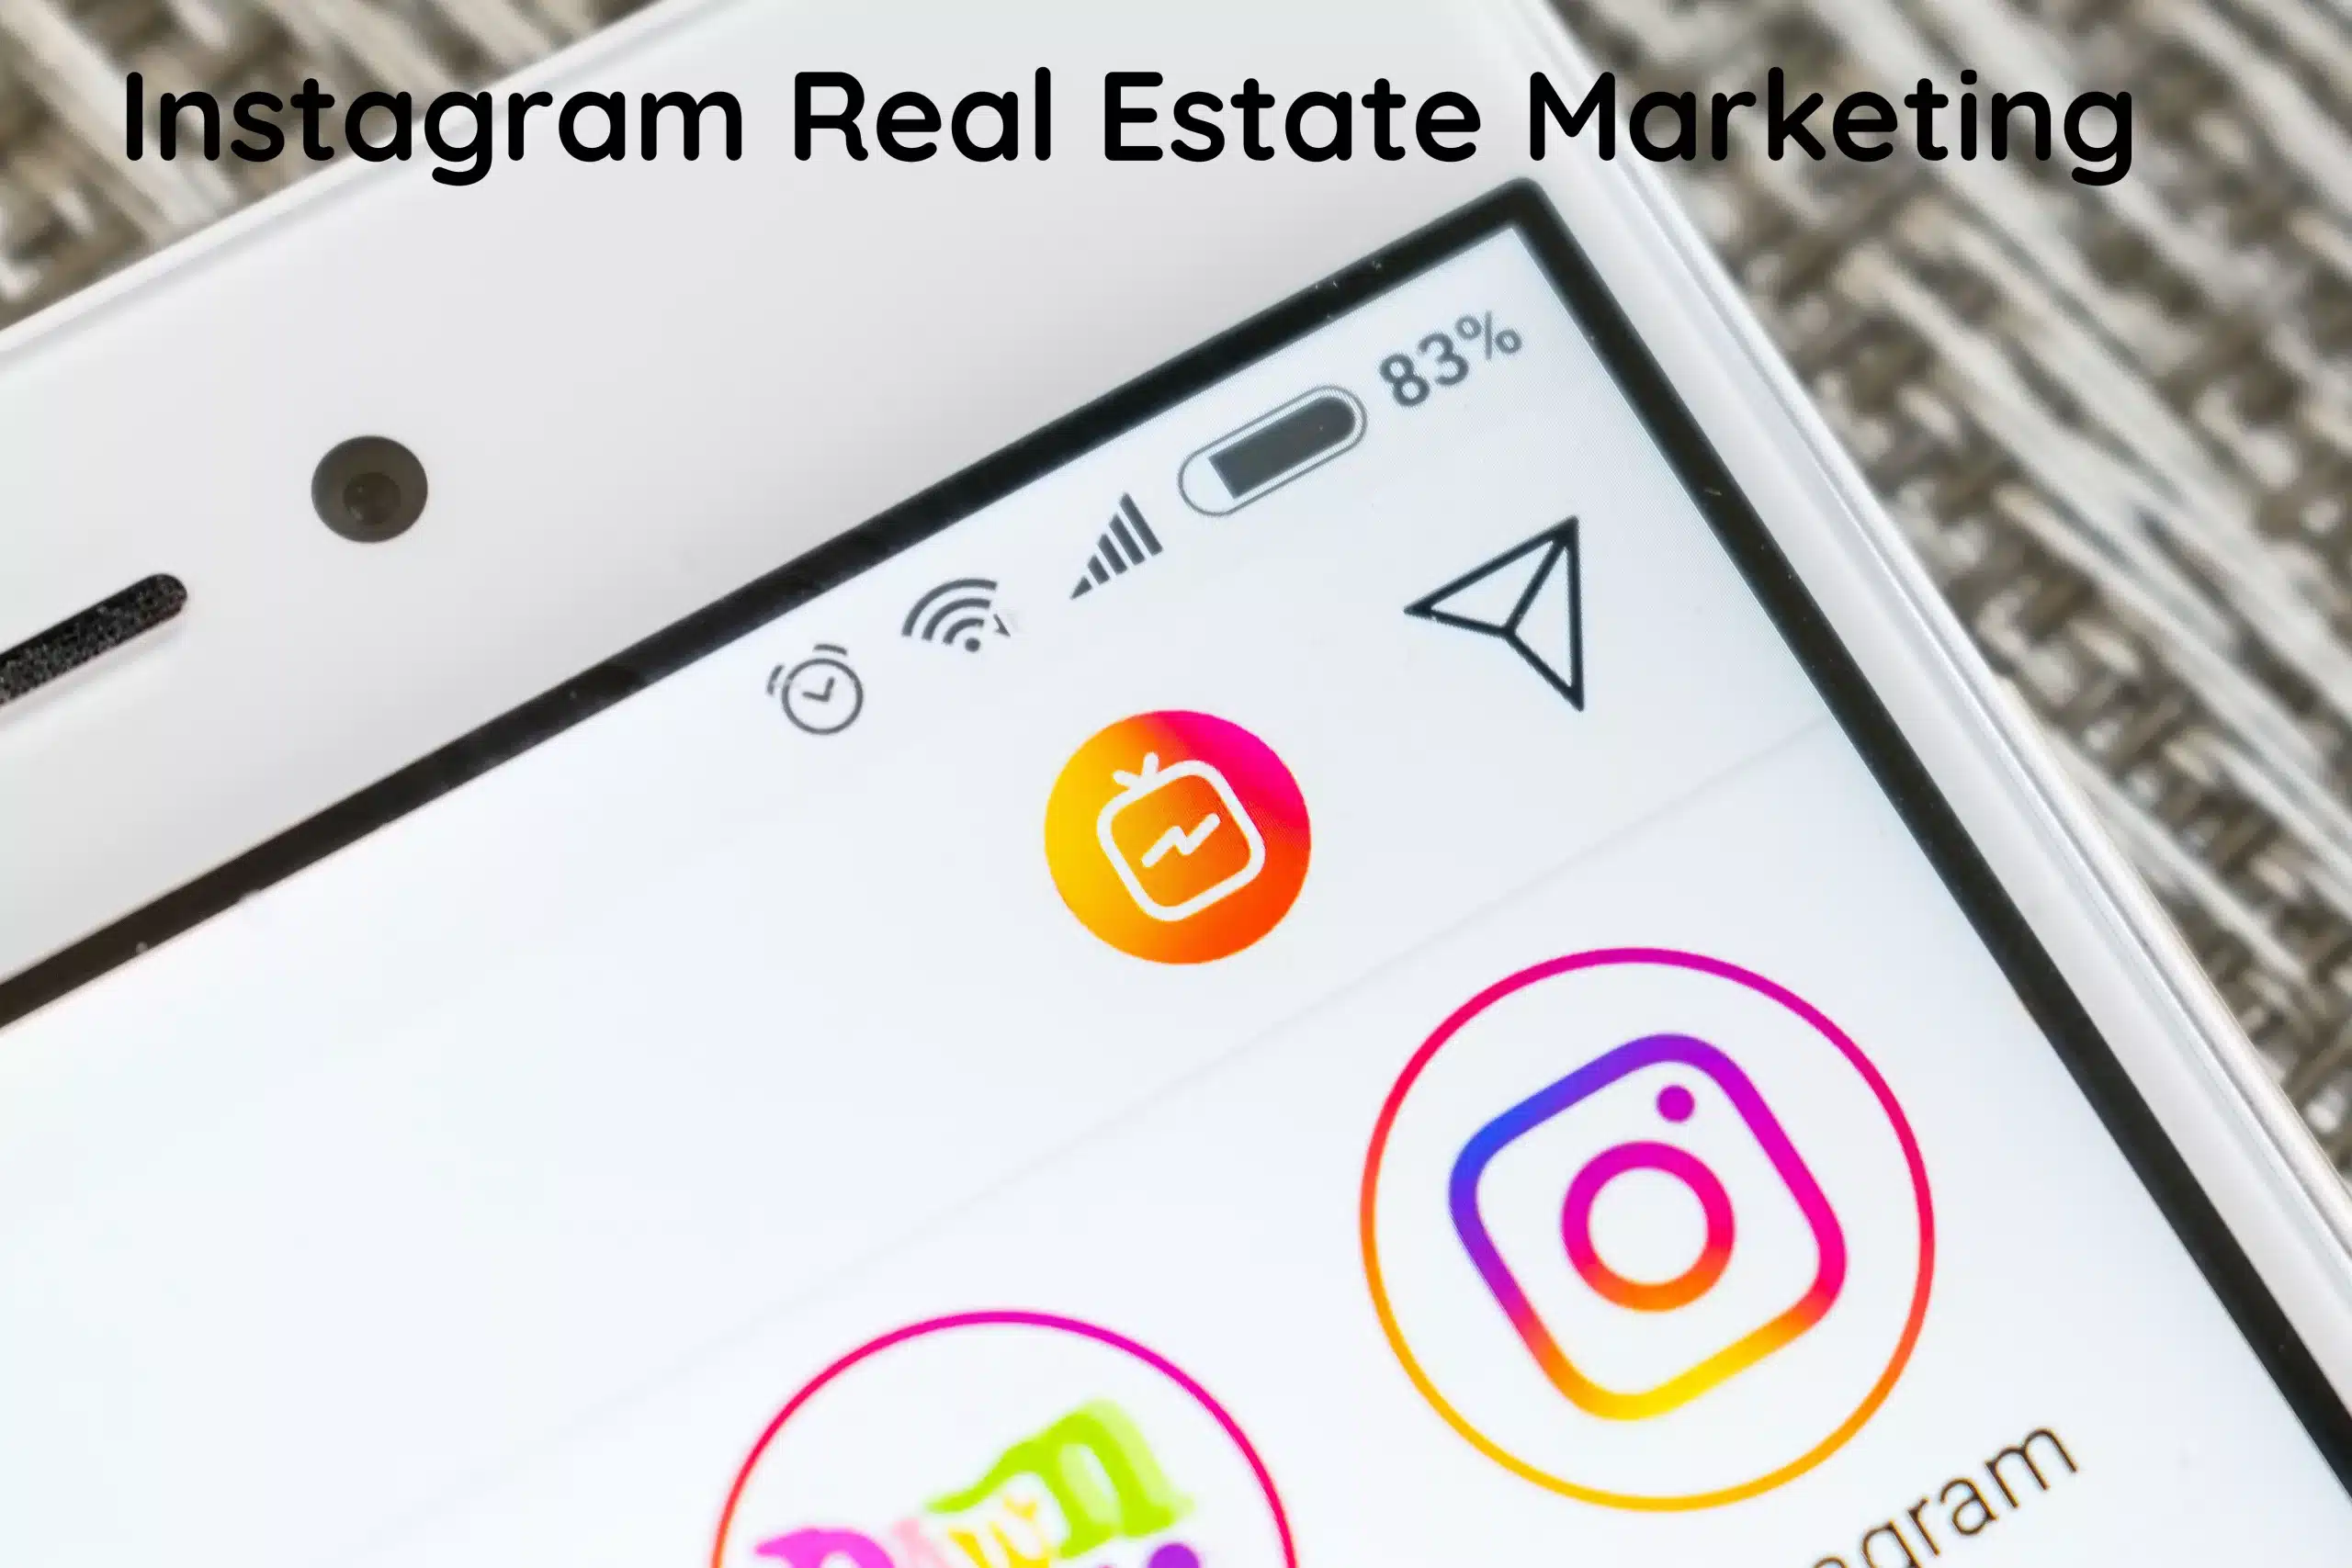 Instagram “Channels” Offers New Ways for Real Estate Professionals to Market their Brand